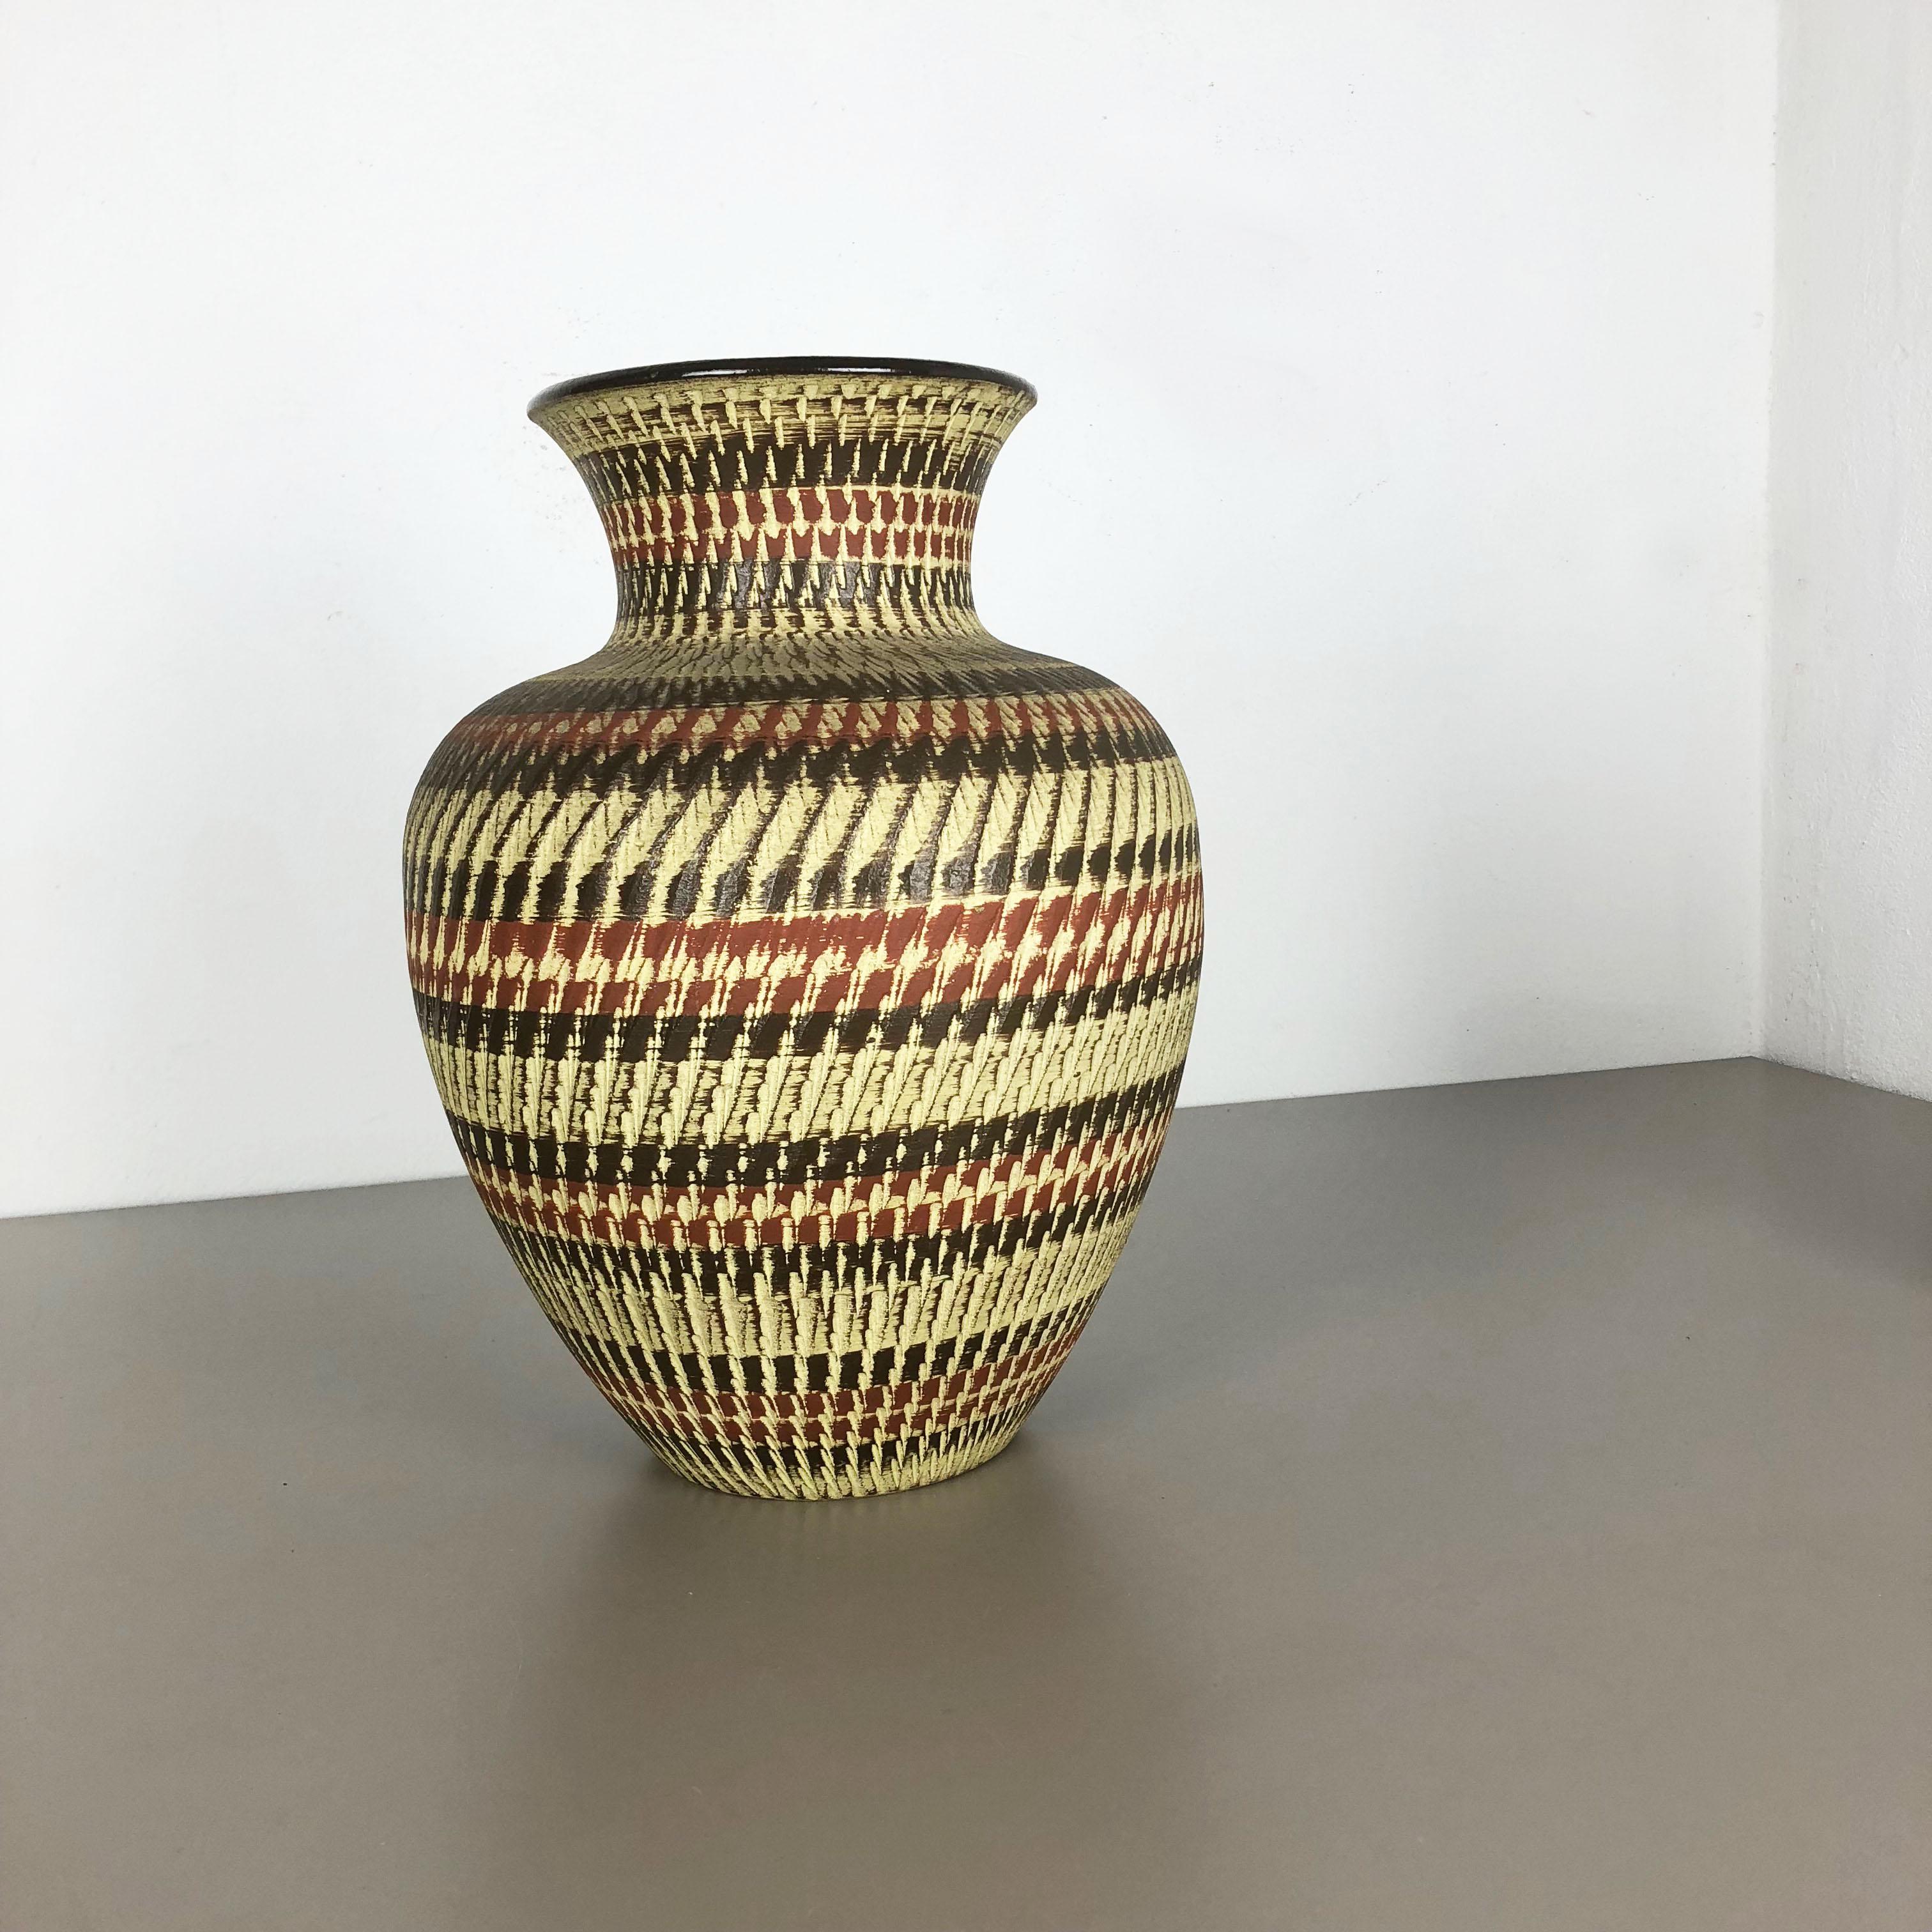 Article:

Pottery ceramic vase


Producer:

Dümmler and Breiden, Germany


Decade:

1950s





Original vintage 1950s pottery stoneware ceramic vase in Germany. High quality German production with a nice abstract coloration. The